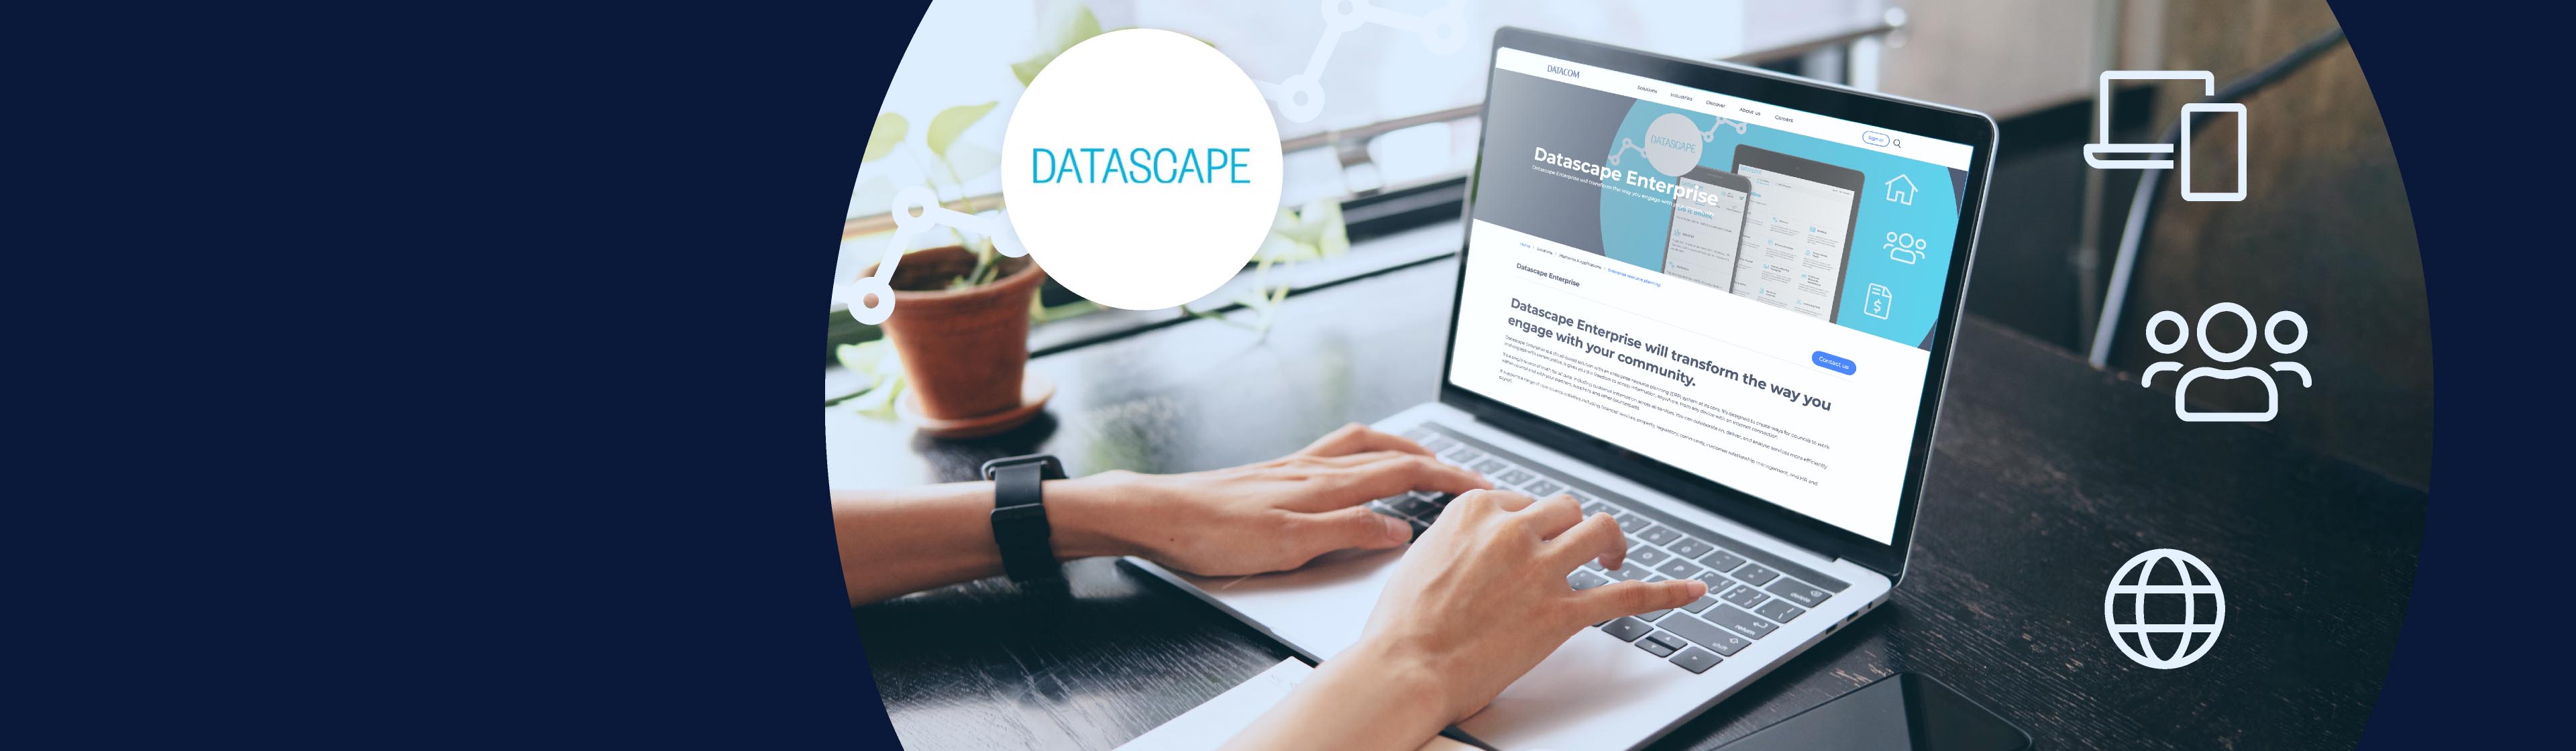 Datascape online services hero image